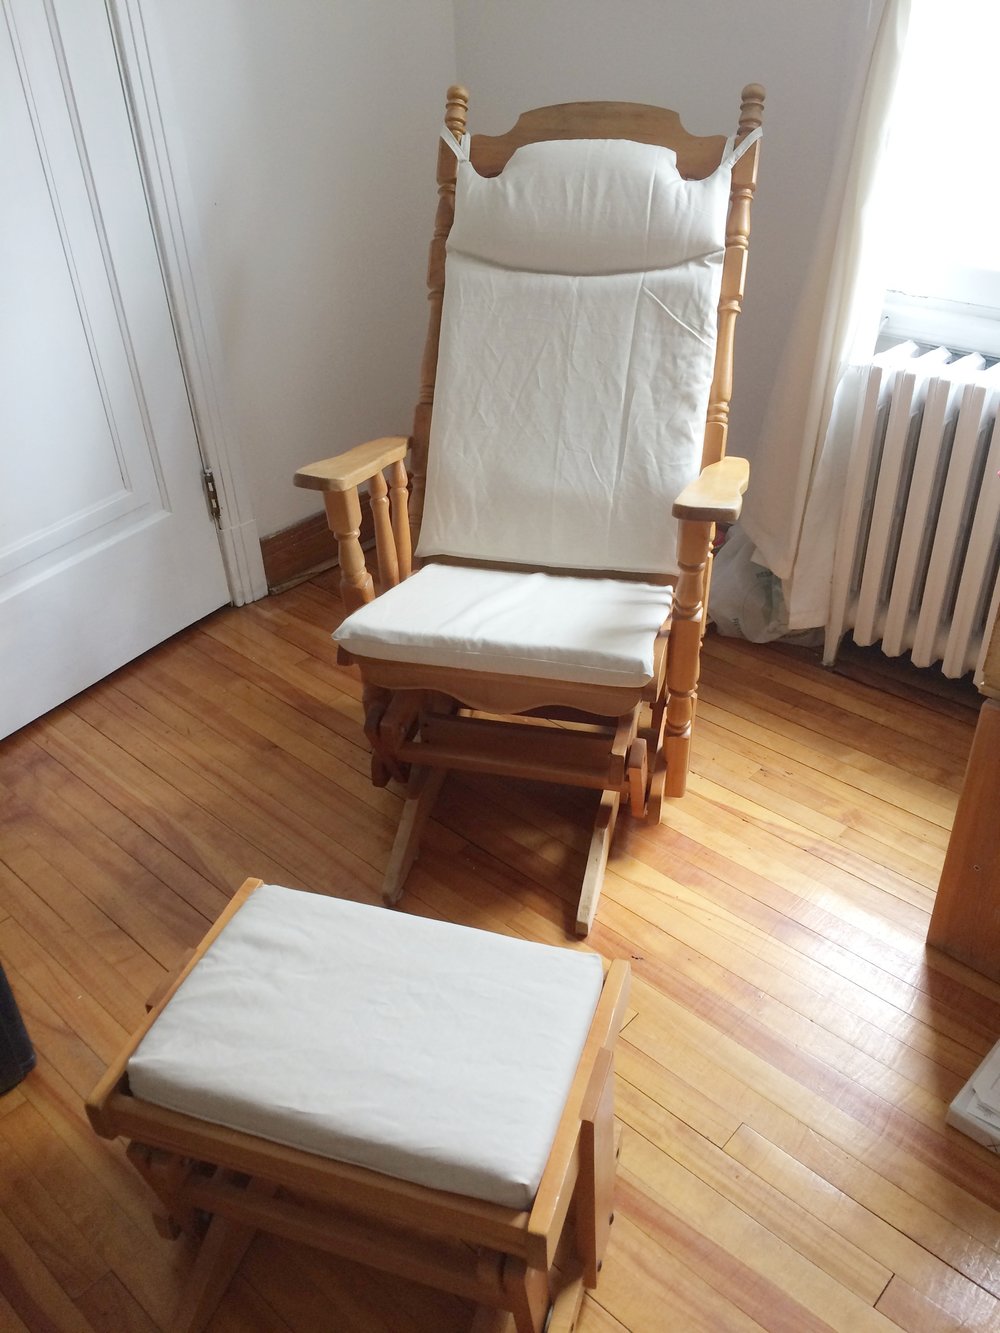 Baby room: Rocking chair after